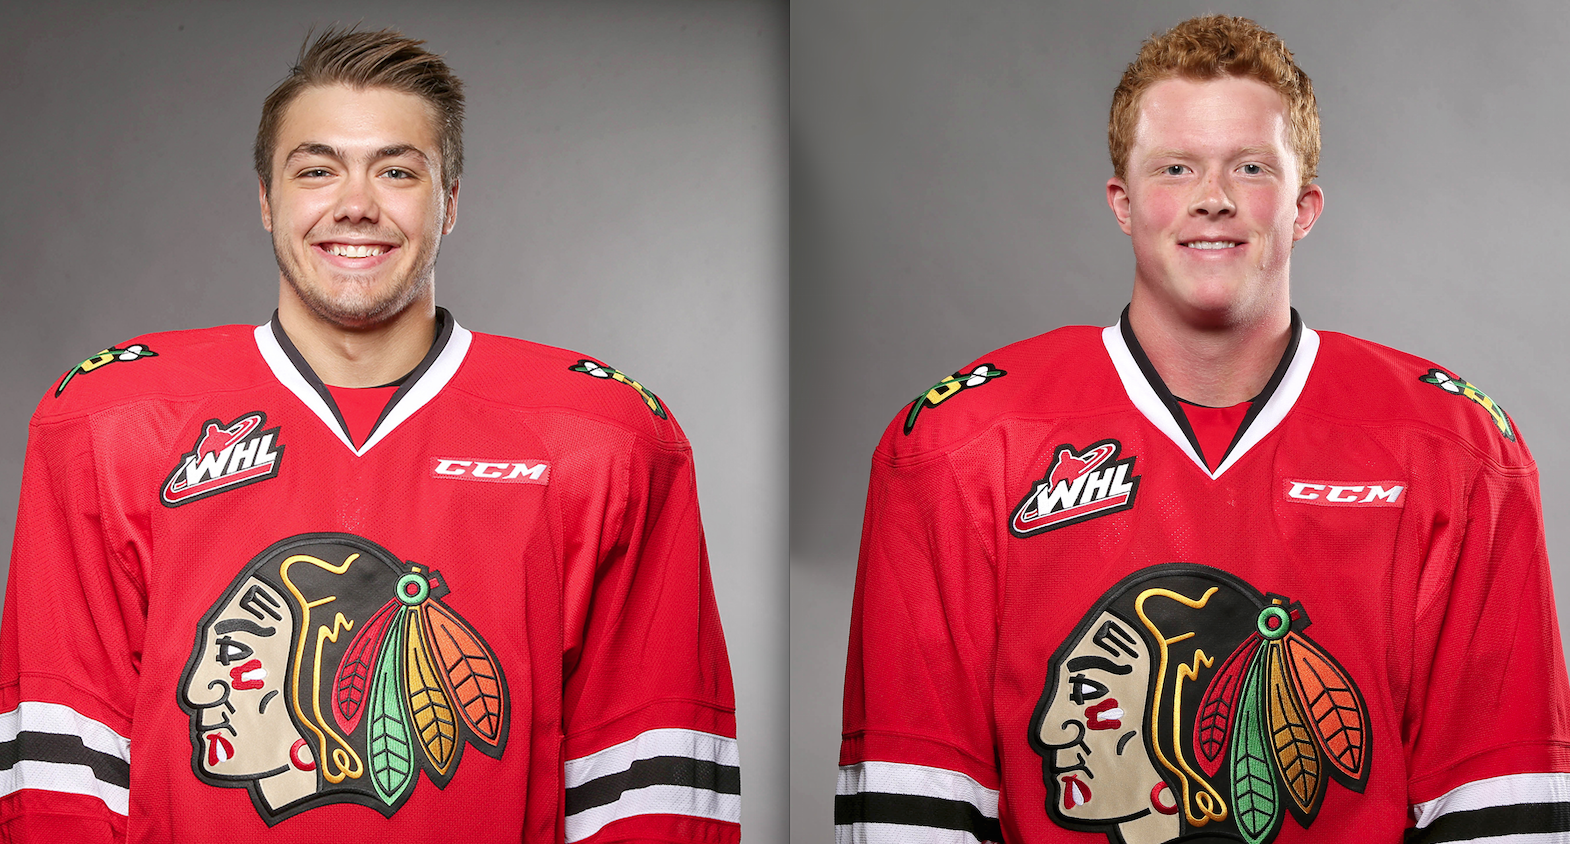 Blake Heinrich, left, and Alex Schoenborn are expected to be key players for the Portland Winterhawks this season (Photos courtesy of Portland Winterhawks).